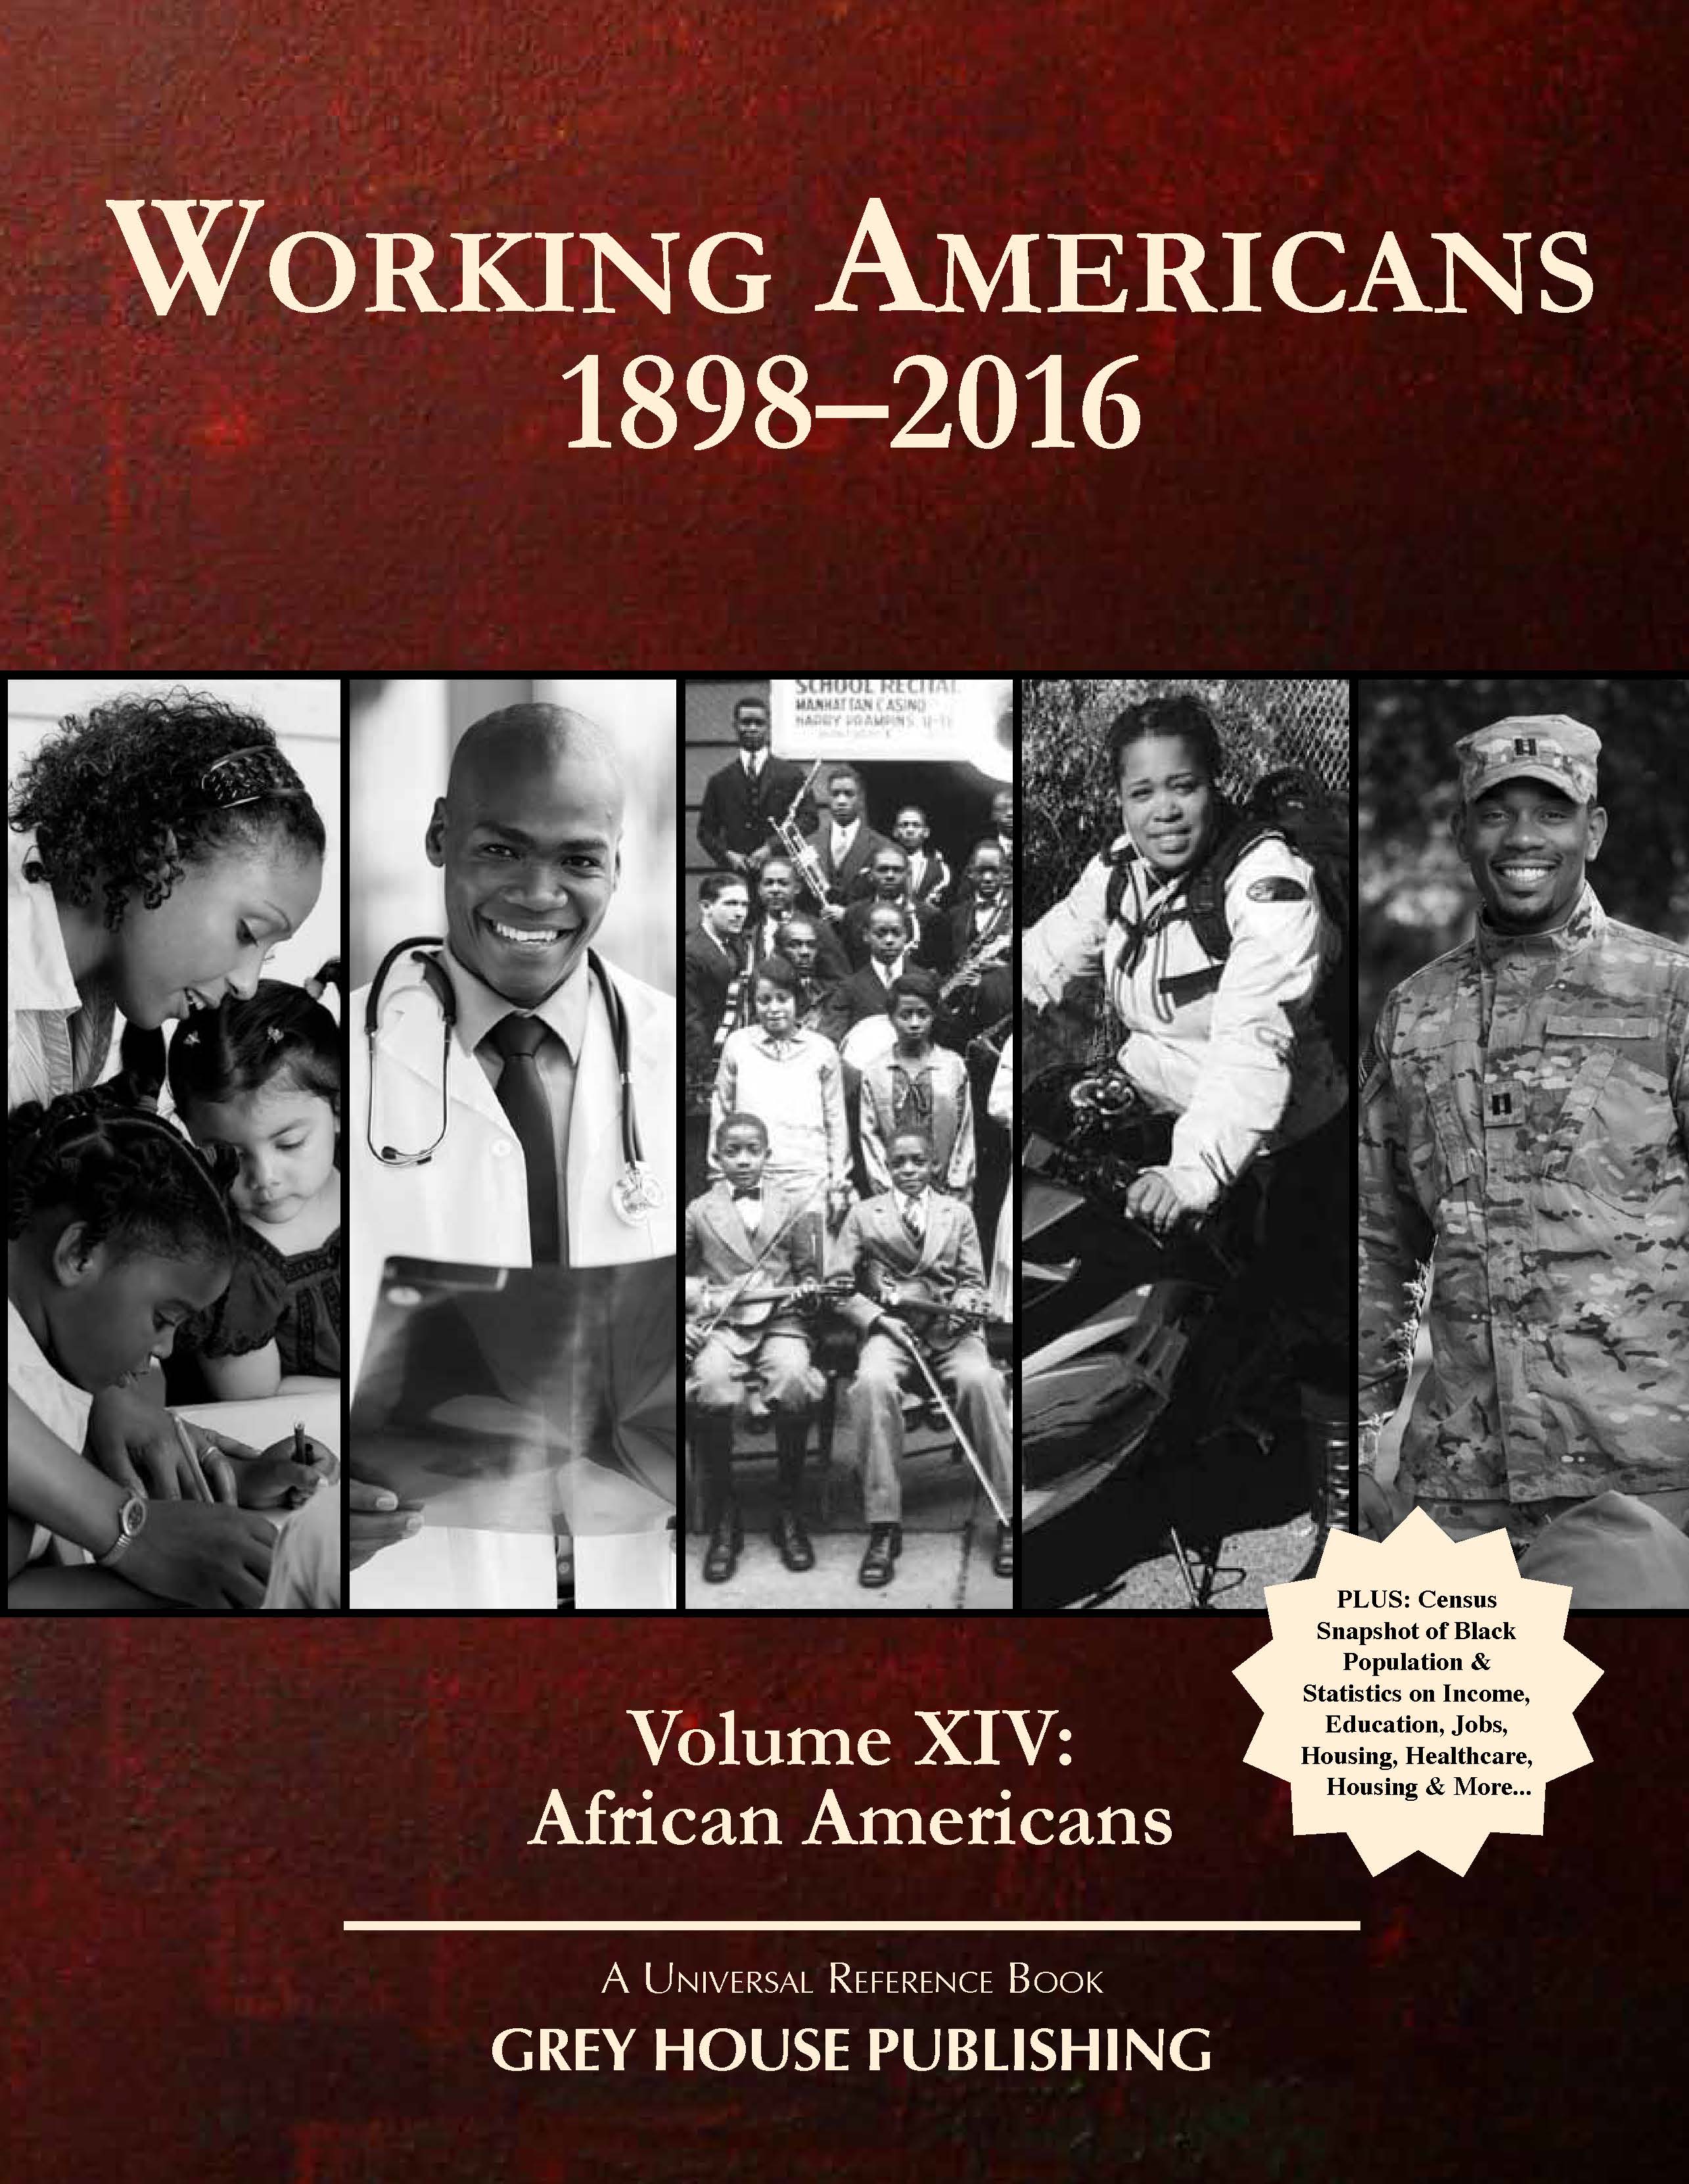 Working Americans 1880-2016 Volume VII: Social Movements